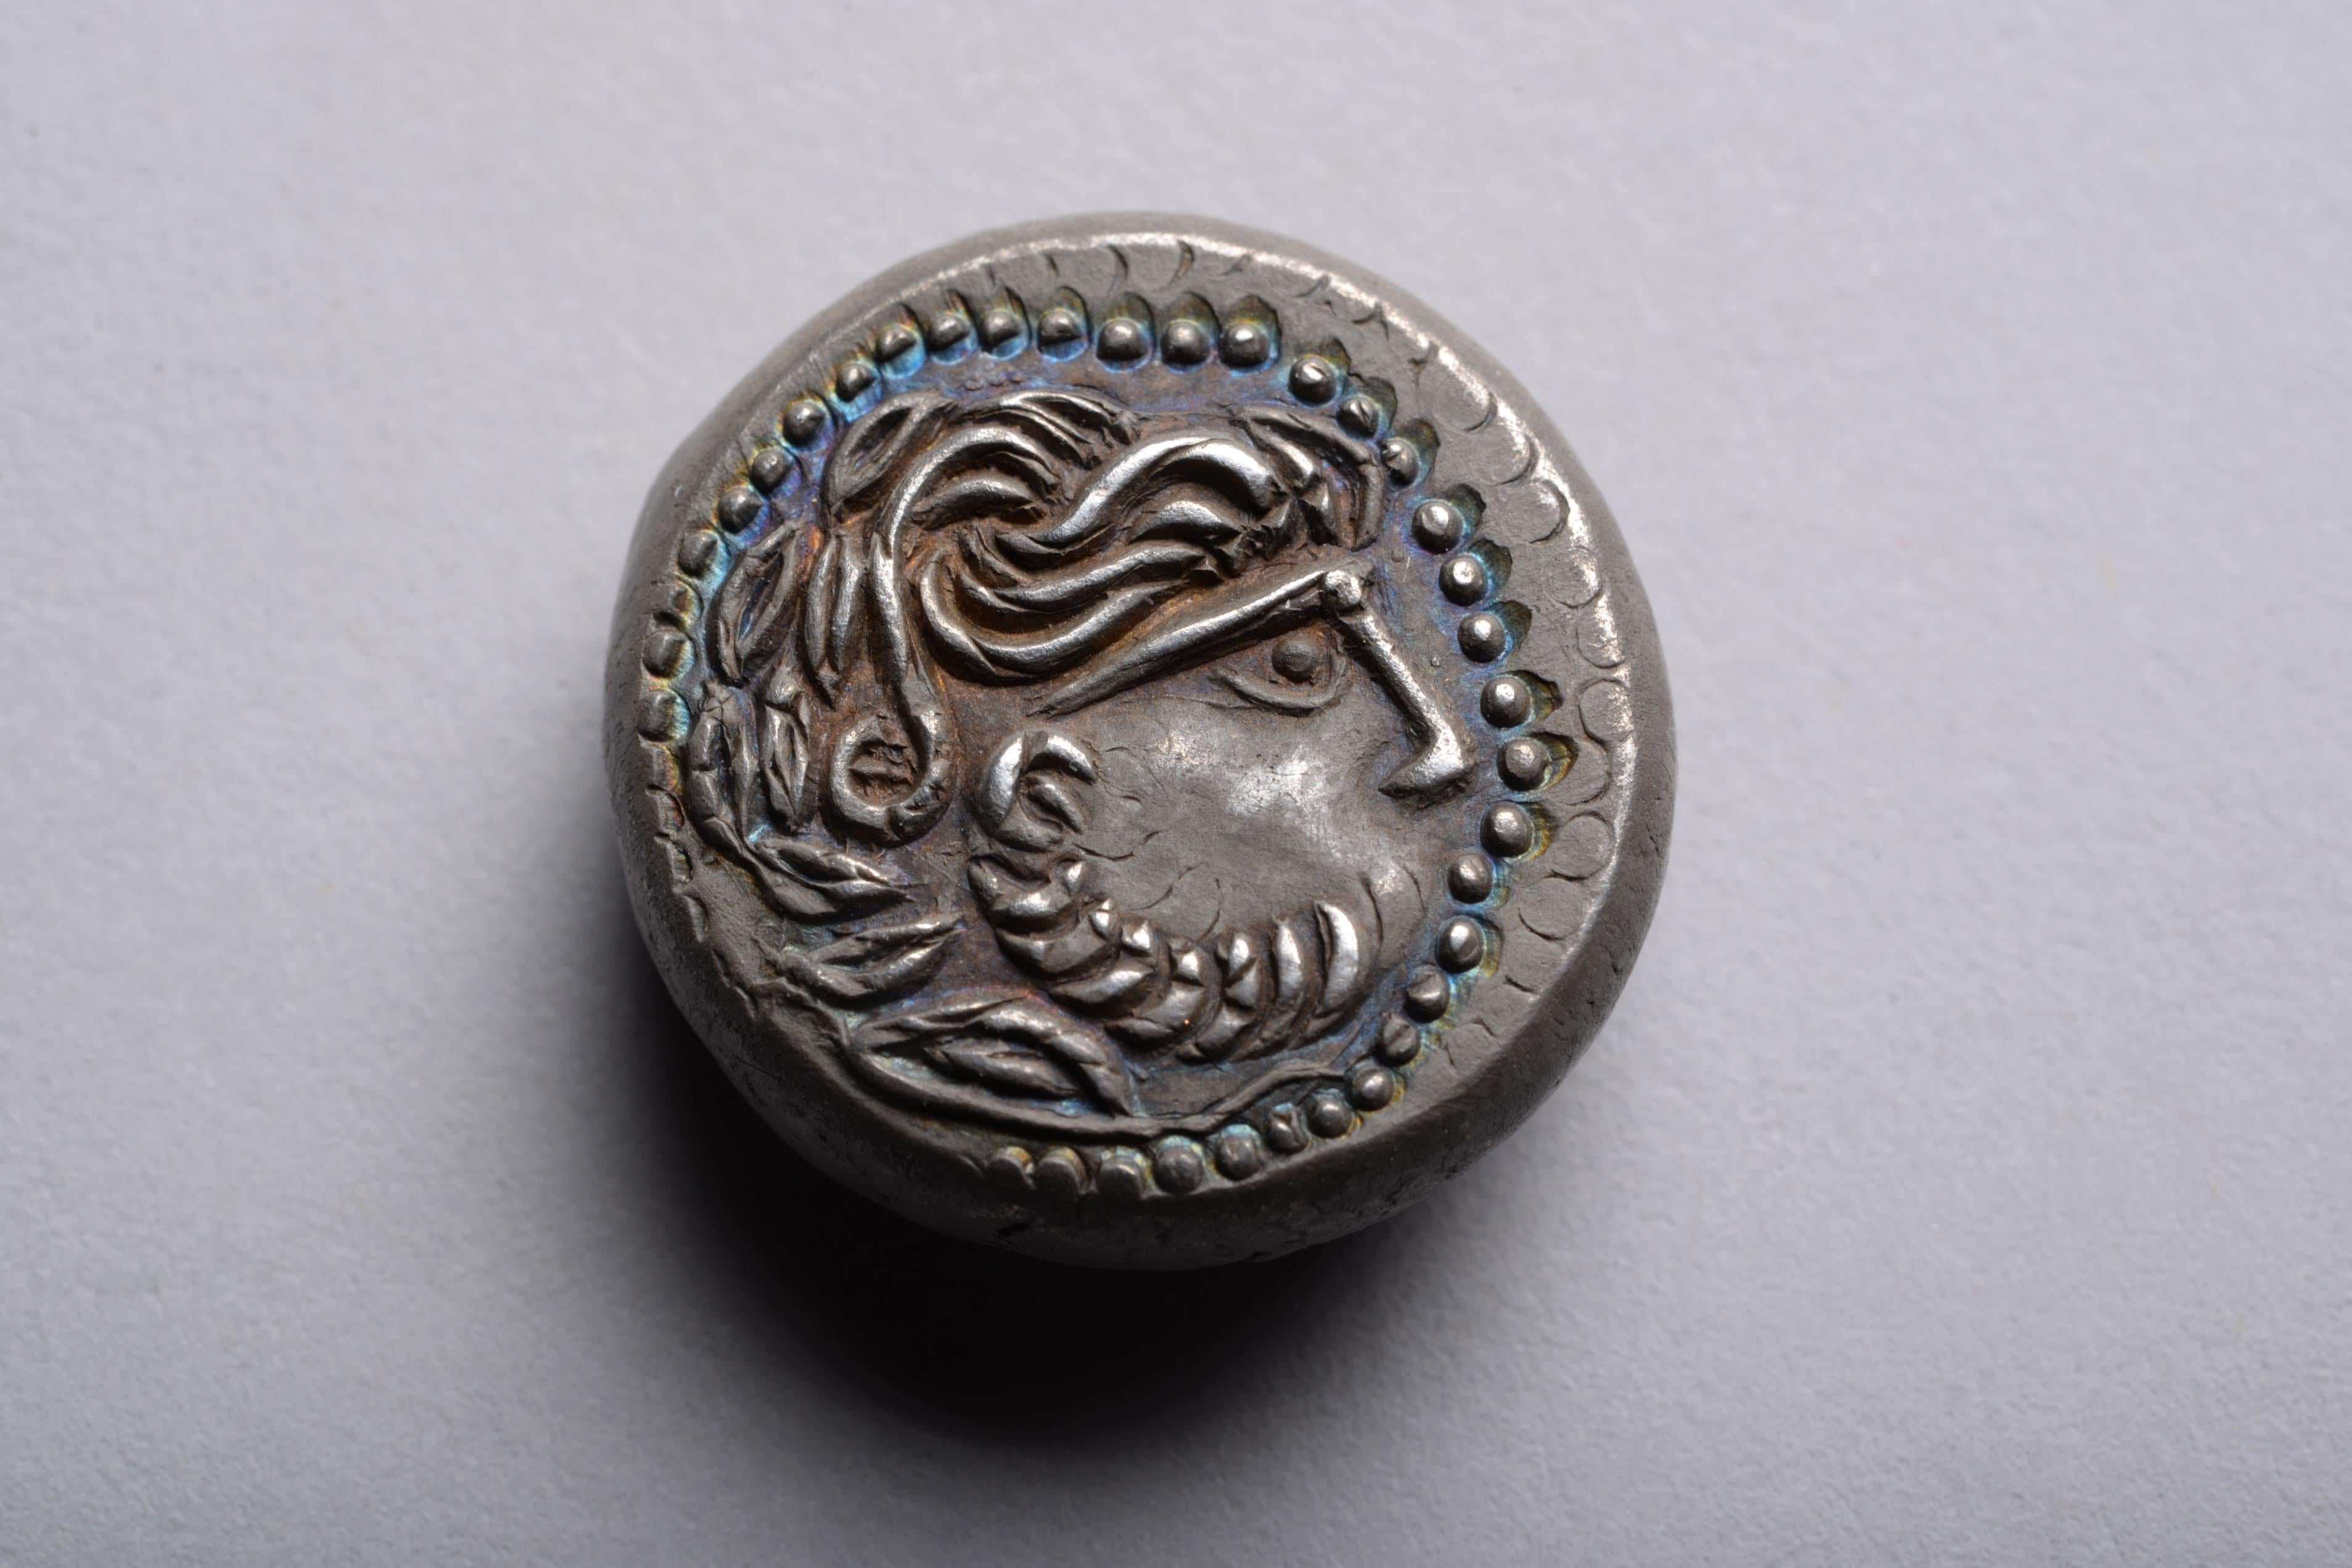 Celtic ‘Dachreiter’ Tetradrachm
Minted in Eastern Europe, circa 1st-2nd Century B.C.
Silver

A magnificent Celtic tetradrachm of the Dachreiter (“roof-rider”) type, minted by a Celtic tribe in Eastern Europe. The obverse with a delightfully